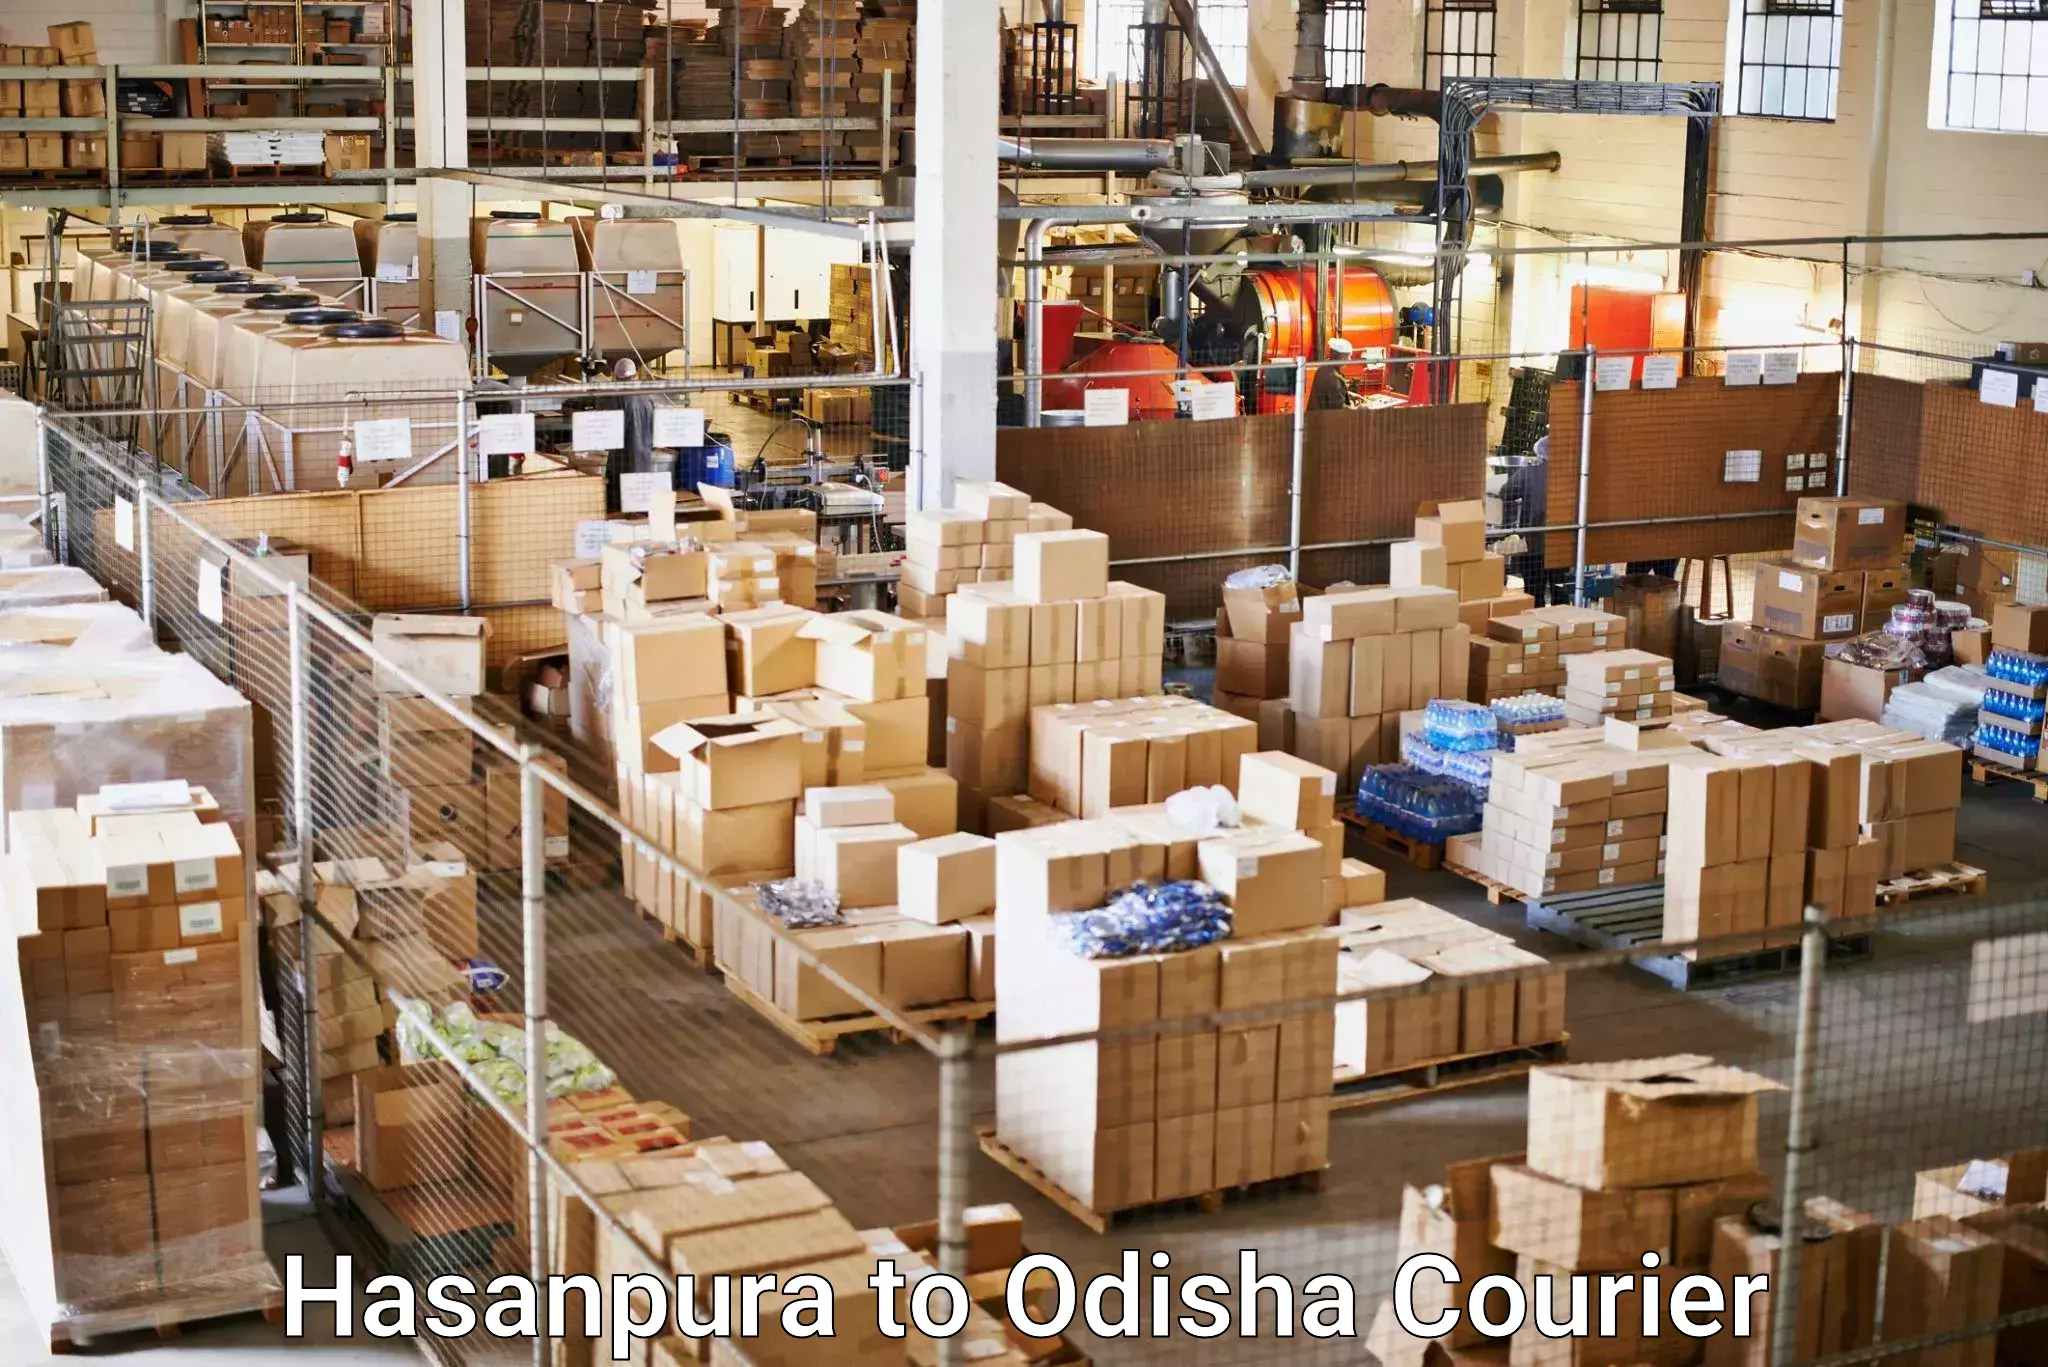 Flexible delivery schedules Hasanpura to Odisha